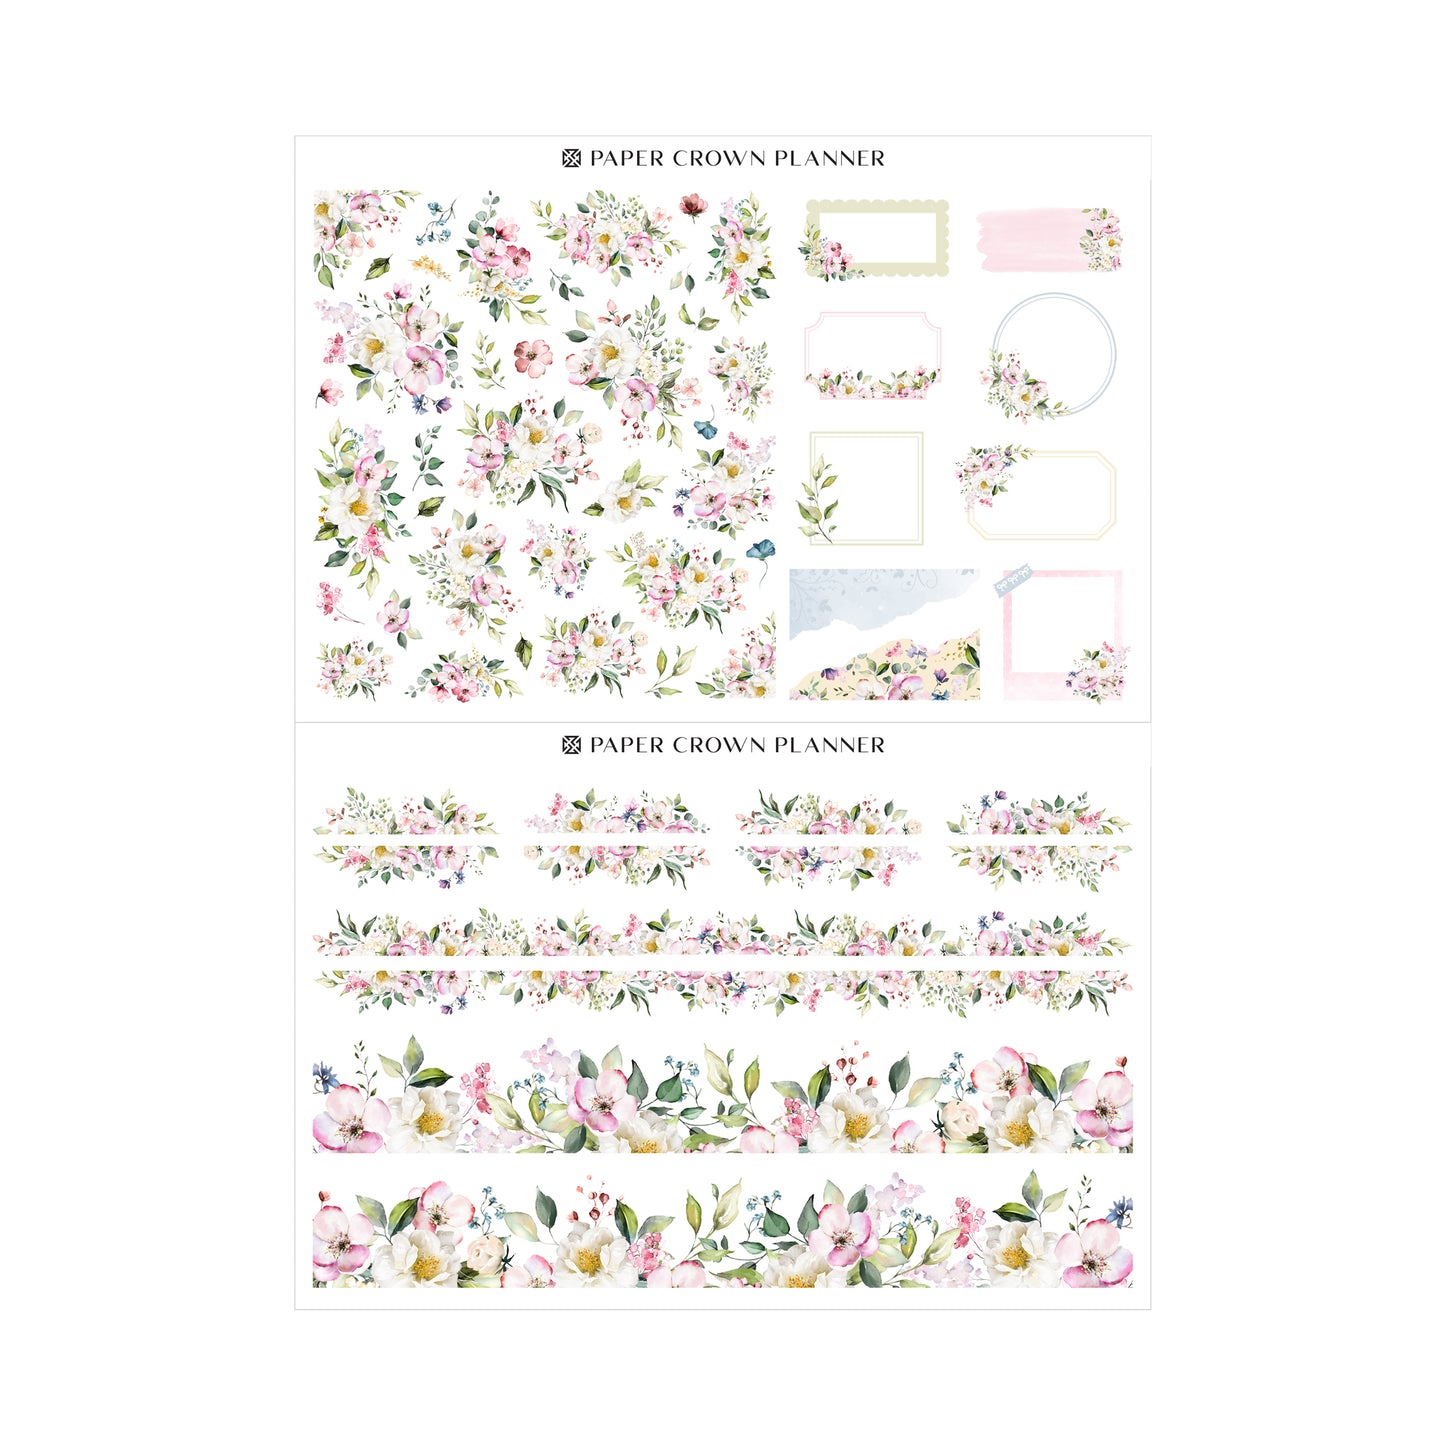 SPRING COUNTRYSIDE // Floral Deco